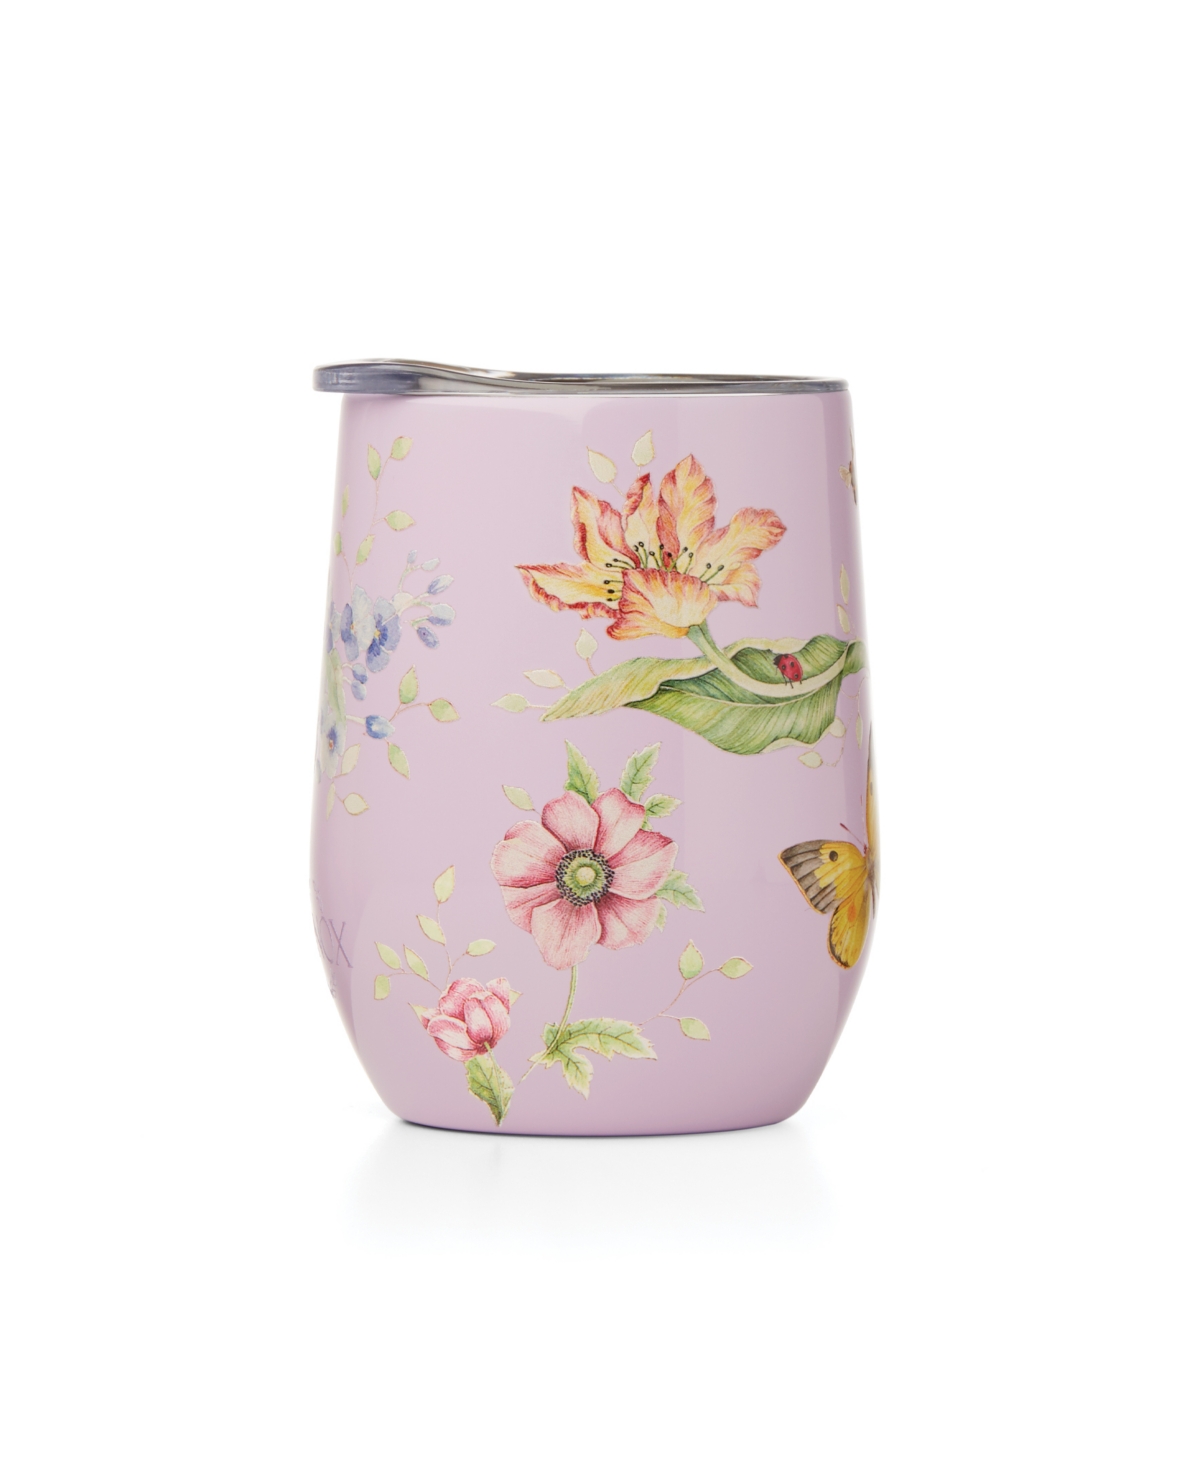 Lenox Butterfly Meadow Stainless Steel Wine Tumbler In Purple And Lavender